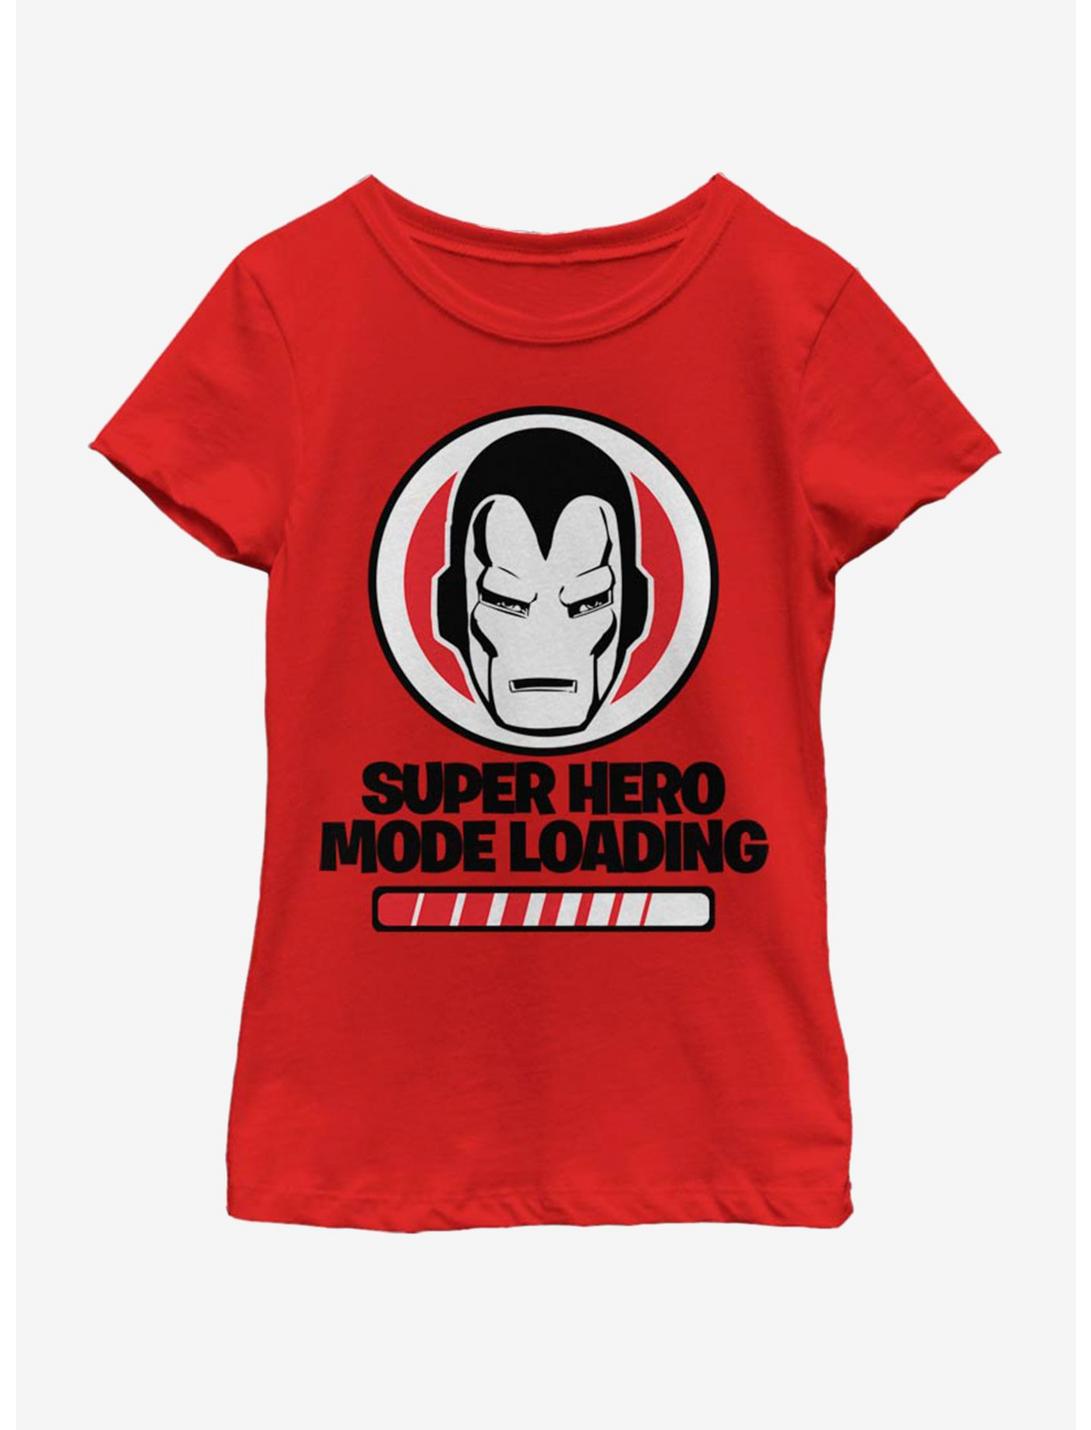 Marvel Ironman Loading Youth Girls T-Shirt, RED, hi-res